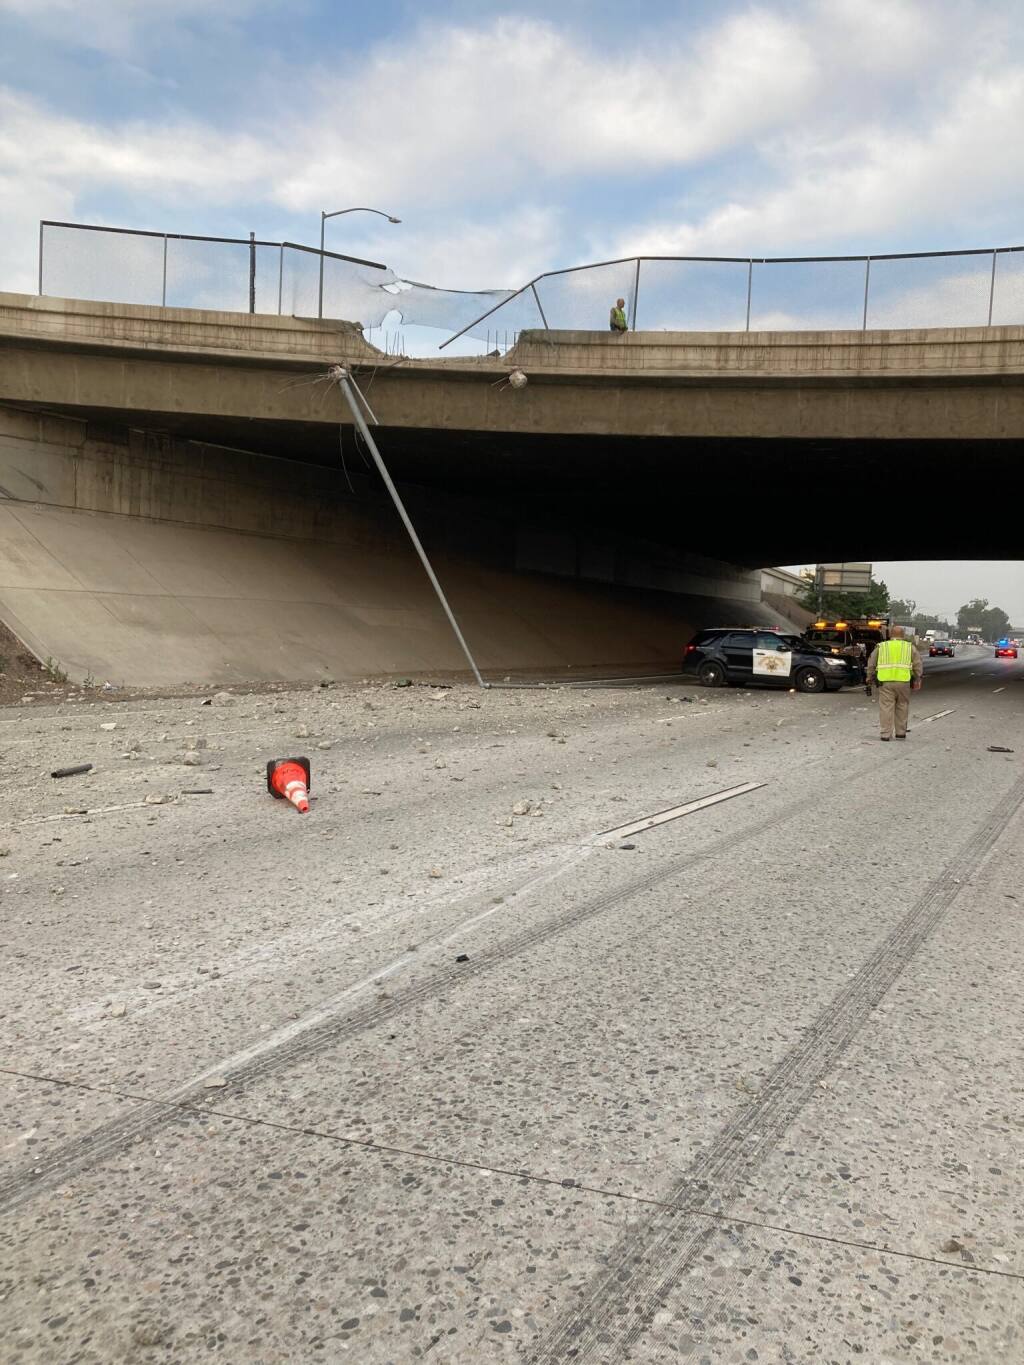 This photo provided by the California Highway Patrol Rancho Cucamonga shows a damaged concrete barrier on a Southern California overpass where a pickup truck crashed through onto the road below on Tuesday, June 29, 2021 in Fontana, Calif. The pickup truck driver was killed when he crashed through the fencing and concrete barrier of the overpass and flew over the edge and smashed onto the freeway below early Tuesday, authorities said. The man, whose name has not been released, was driving his 2005 Ford pickup around 4:10 a.m. at a high speed on Interstate 10 in Fontana, the California Highway Patrol said in a news release. (CHP Rancho Cucamonga via AP)